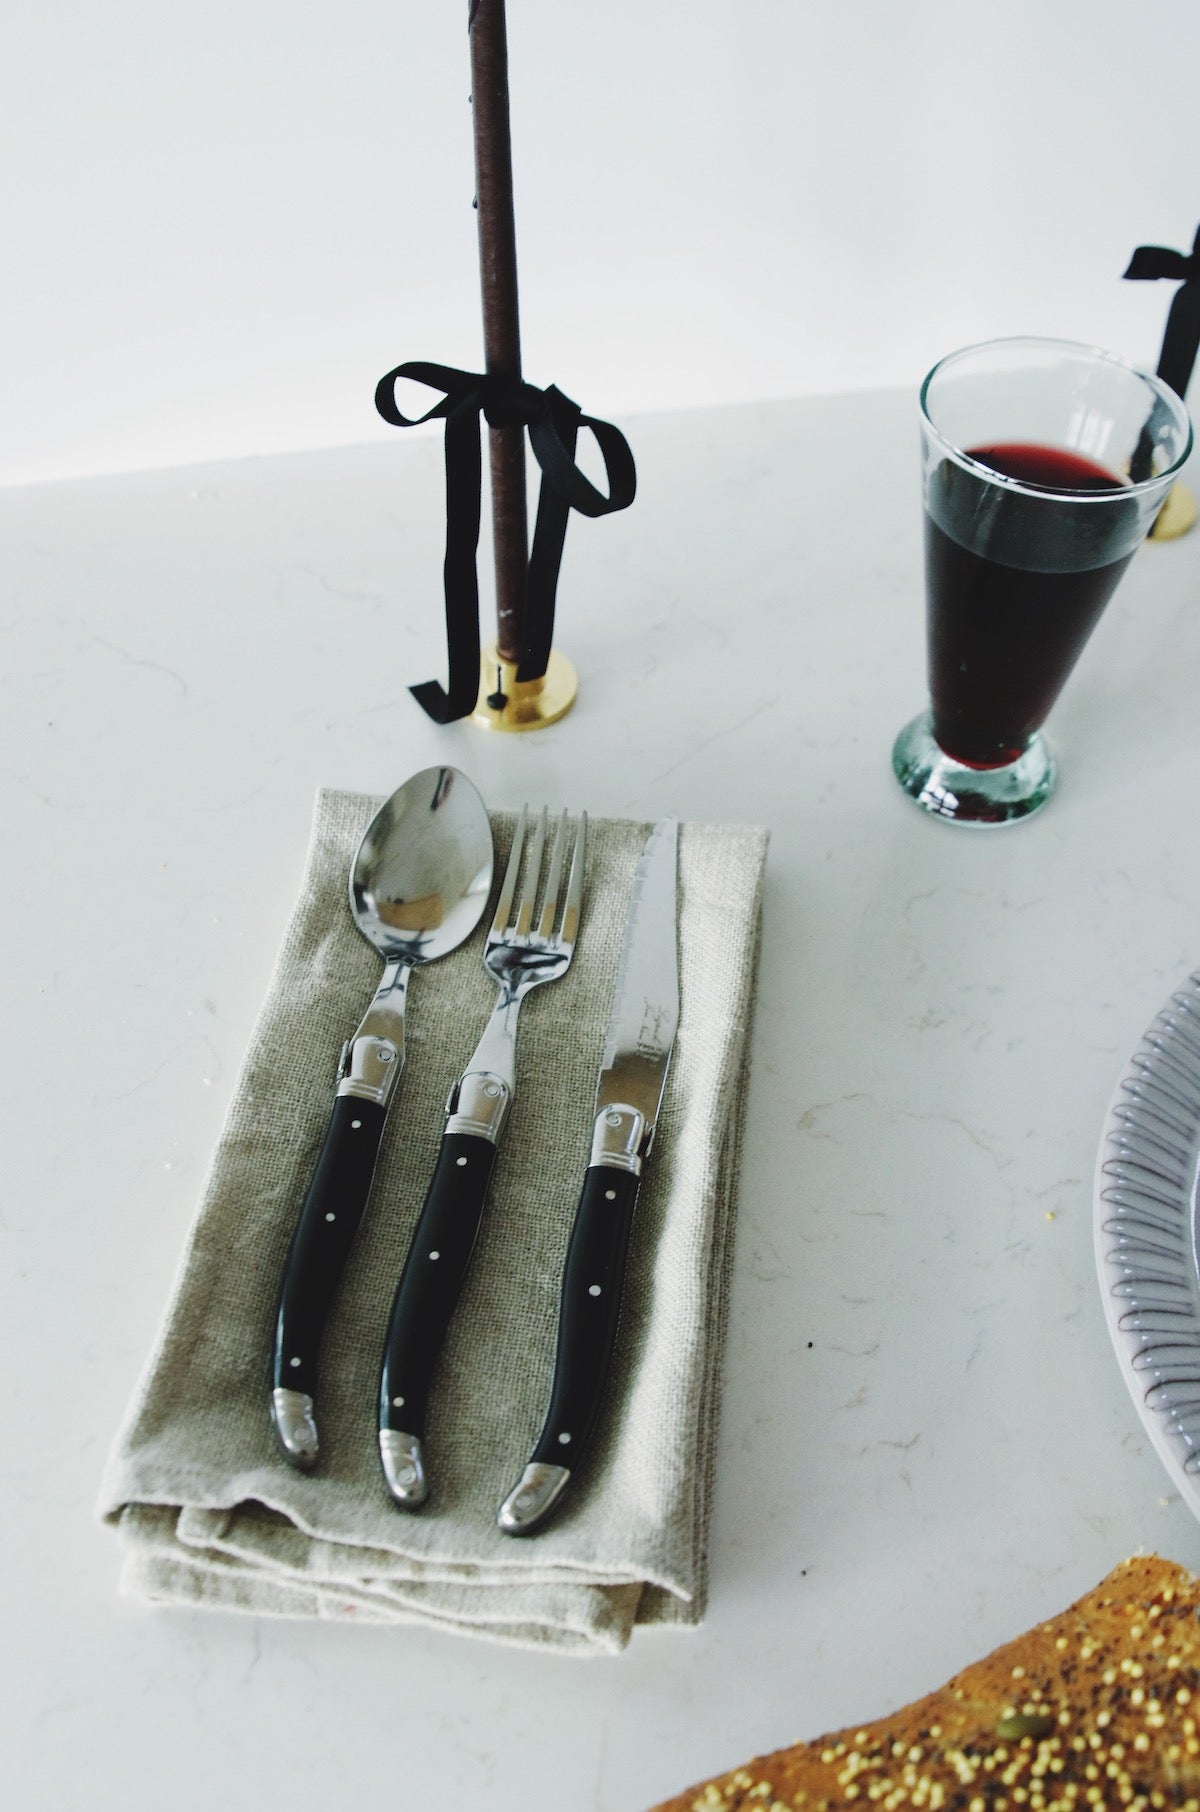 A set of elegant French Laguiole cutlery, including a spoon, fork, and two knives with black handles, is neatly placed on a natural linen napkin. To the right, there's a clear glass filled with red wine, and in the background, a candle with a black ribbon around its brass holder adds a touch of sophistication to the simple yet refined table setting.